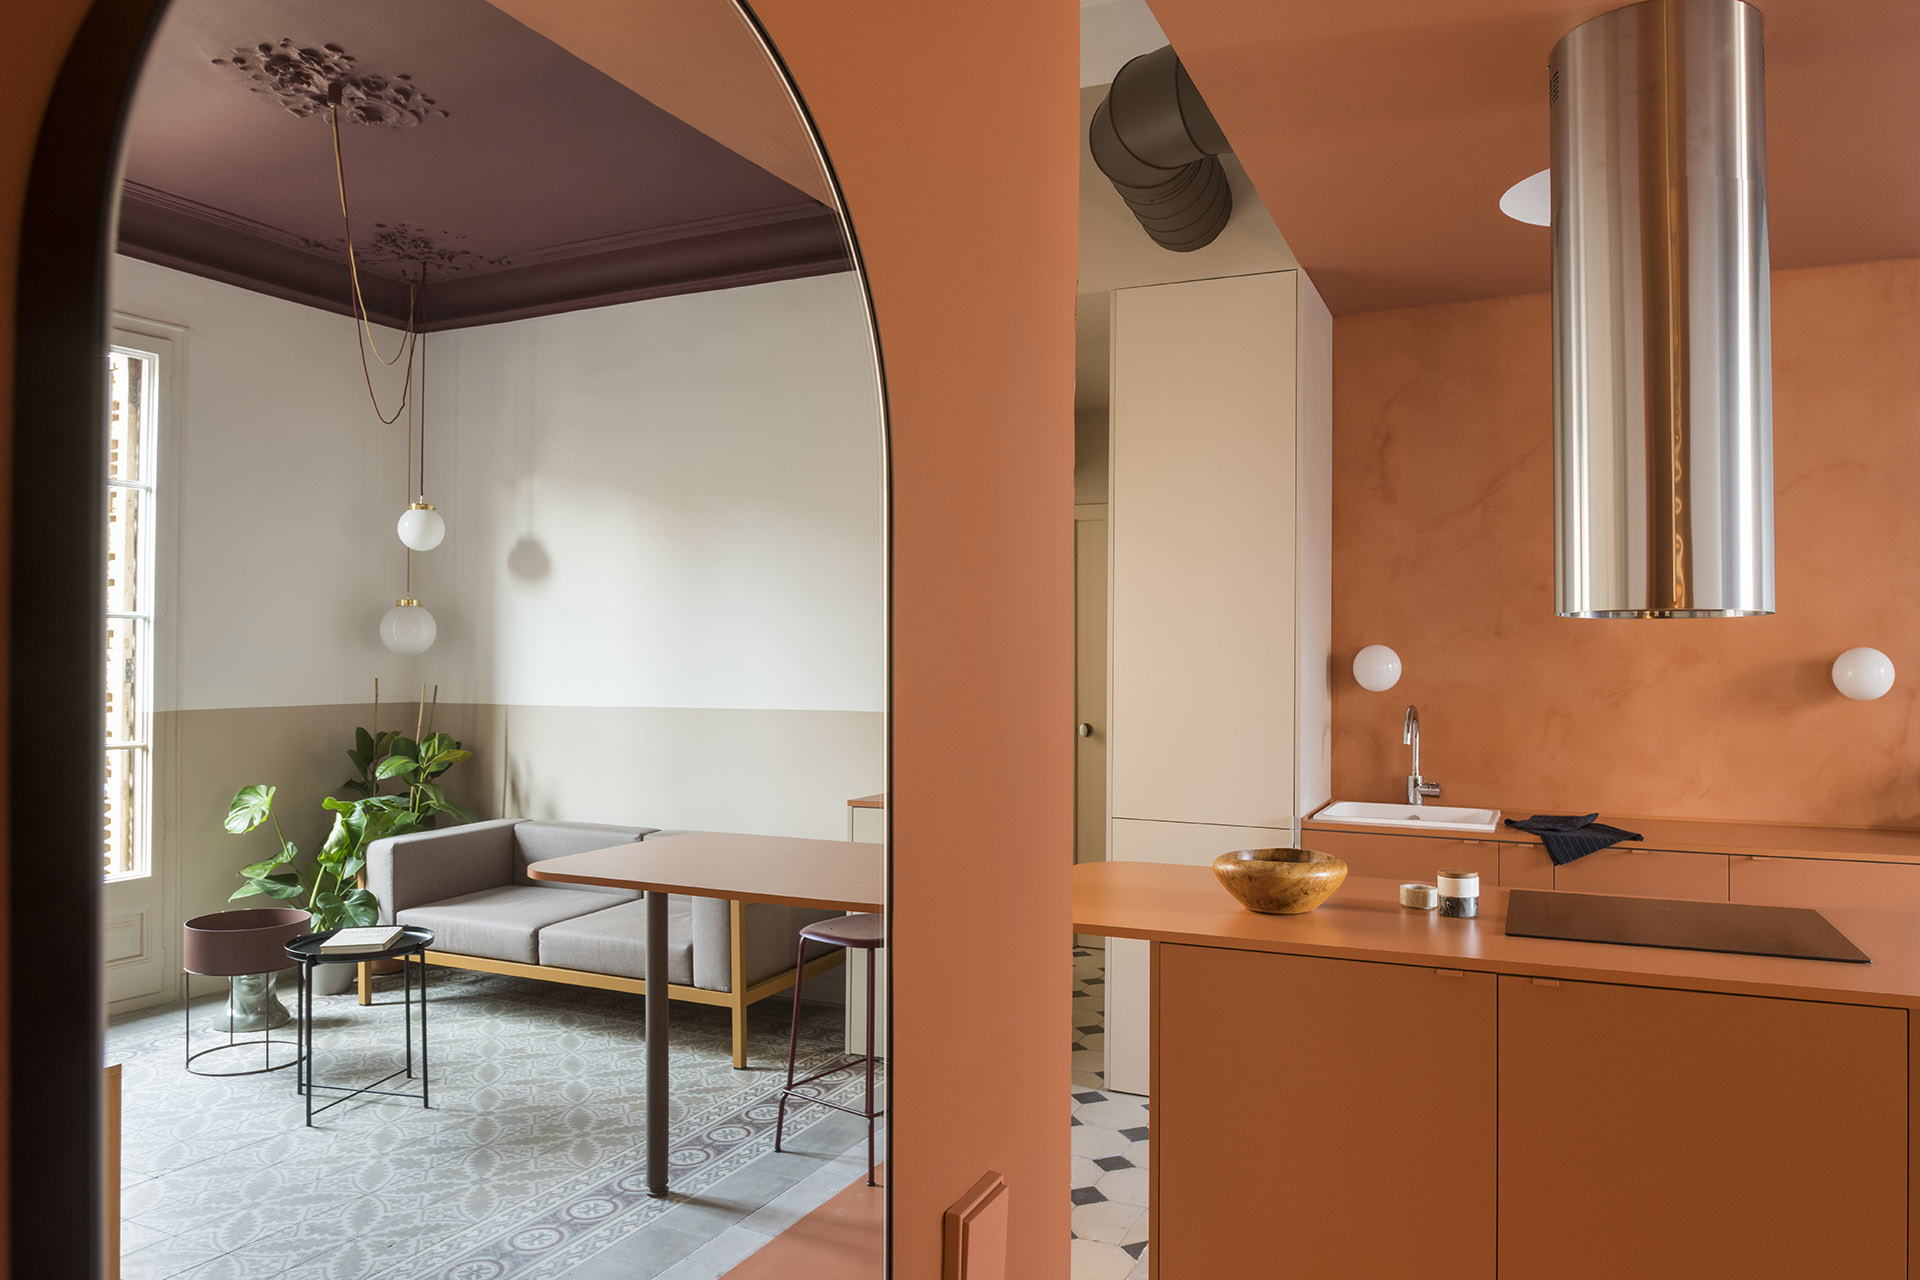 Klinker Apartment. Bold colors expressed in a color-block that defines the spaces